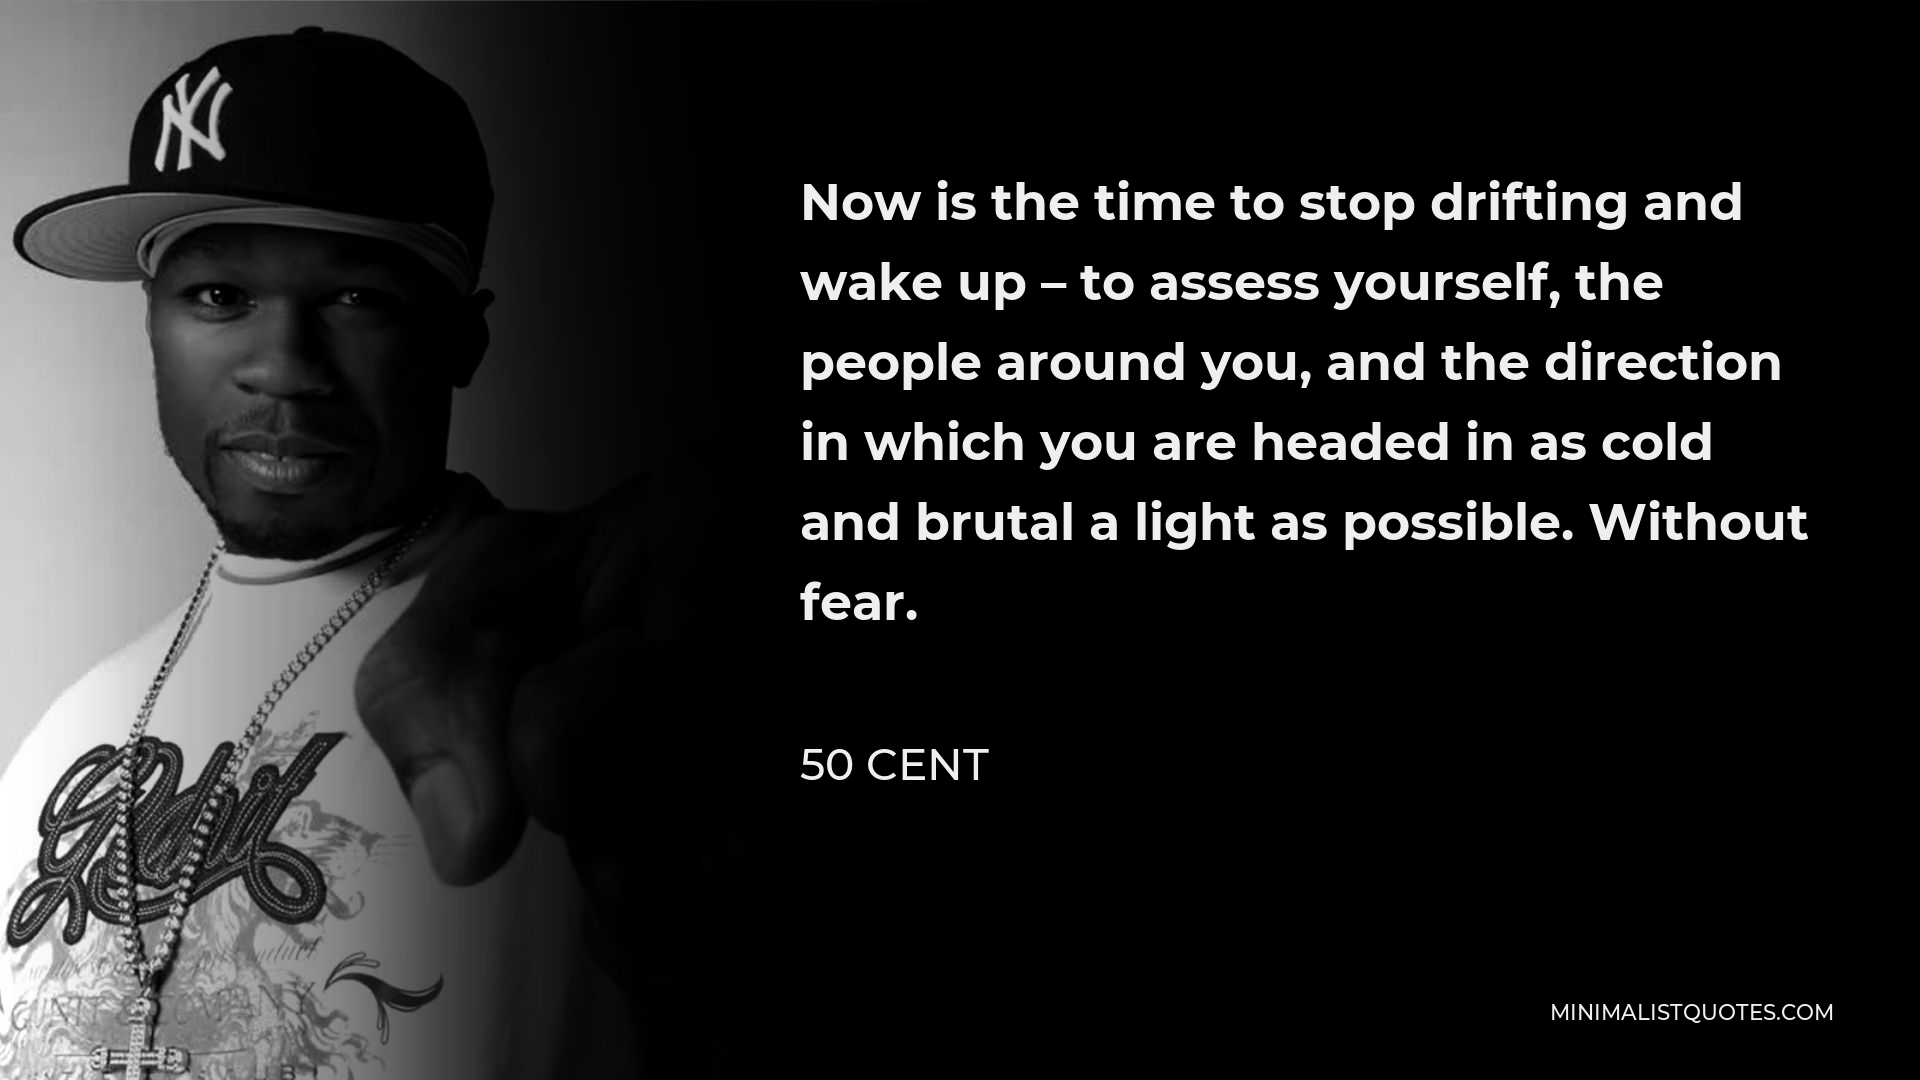 50 Cent Quote - Now is the time to stop drifting and wake up – to assess yourself, the people around you, and the direction in which you are headed in as cold and brutal a light as possible. Without fear.